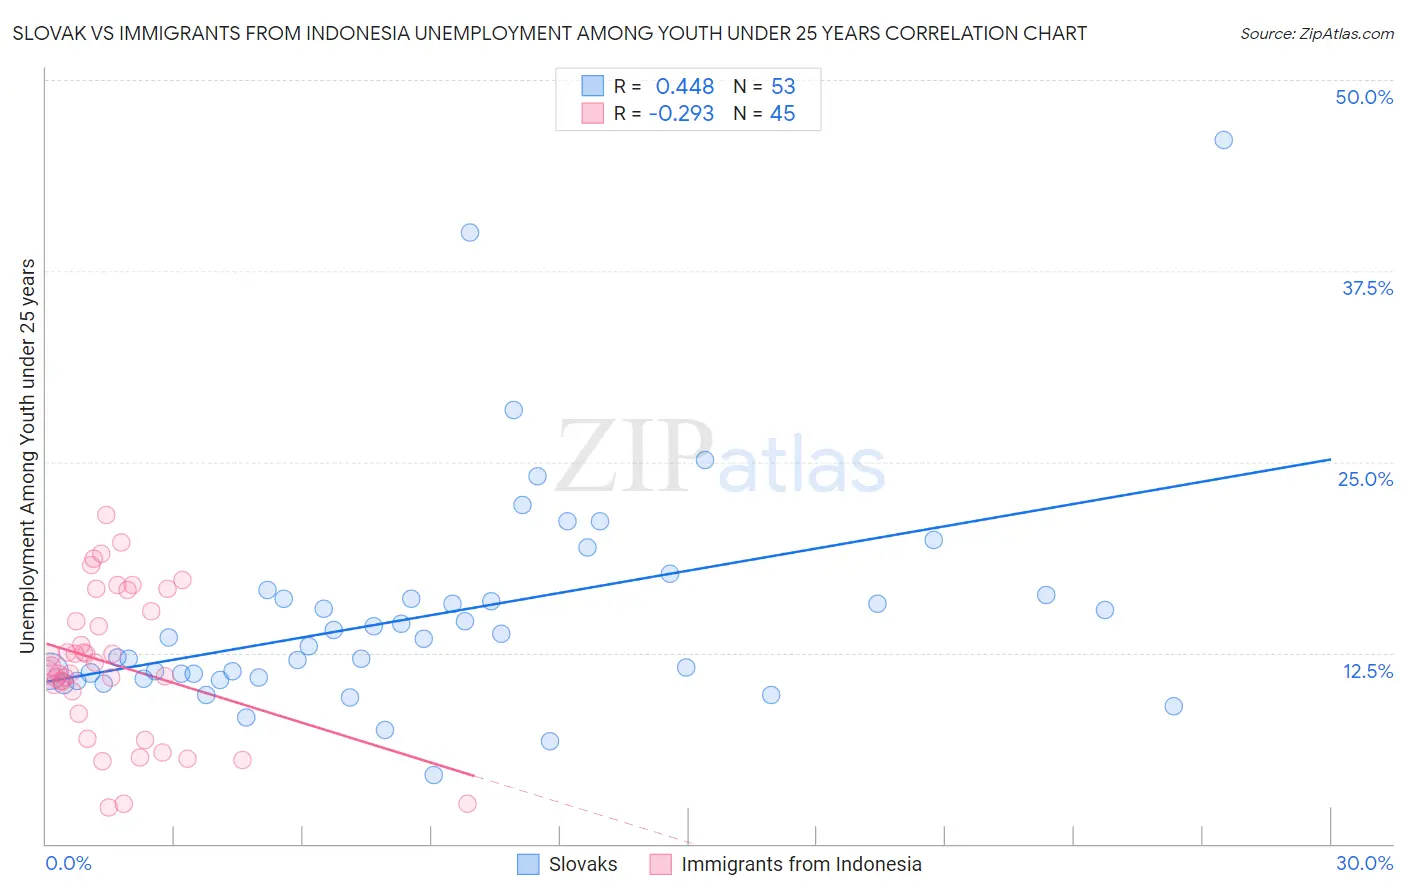 Slovak vs Immigrants from Indonesia Unemployment Among Youth under 25 years